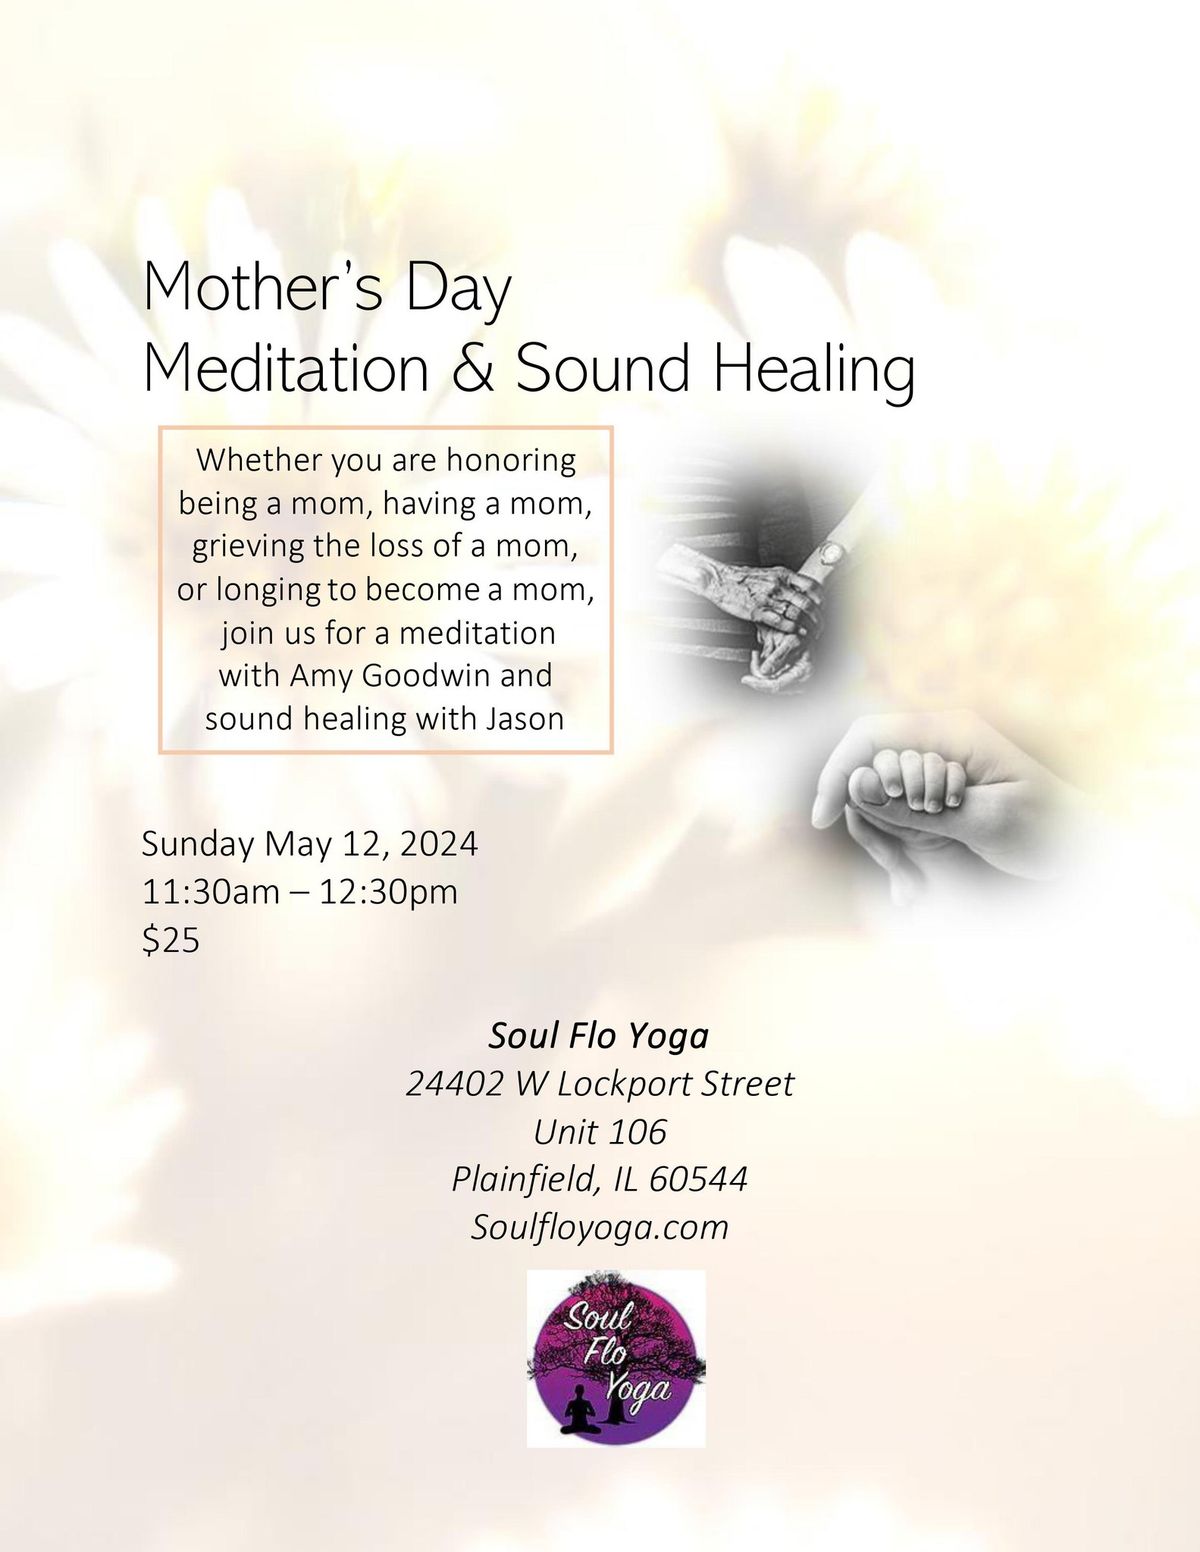 Mother's Day Meditation & Sound Healing